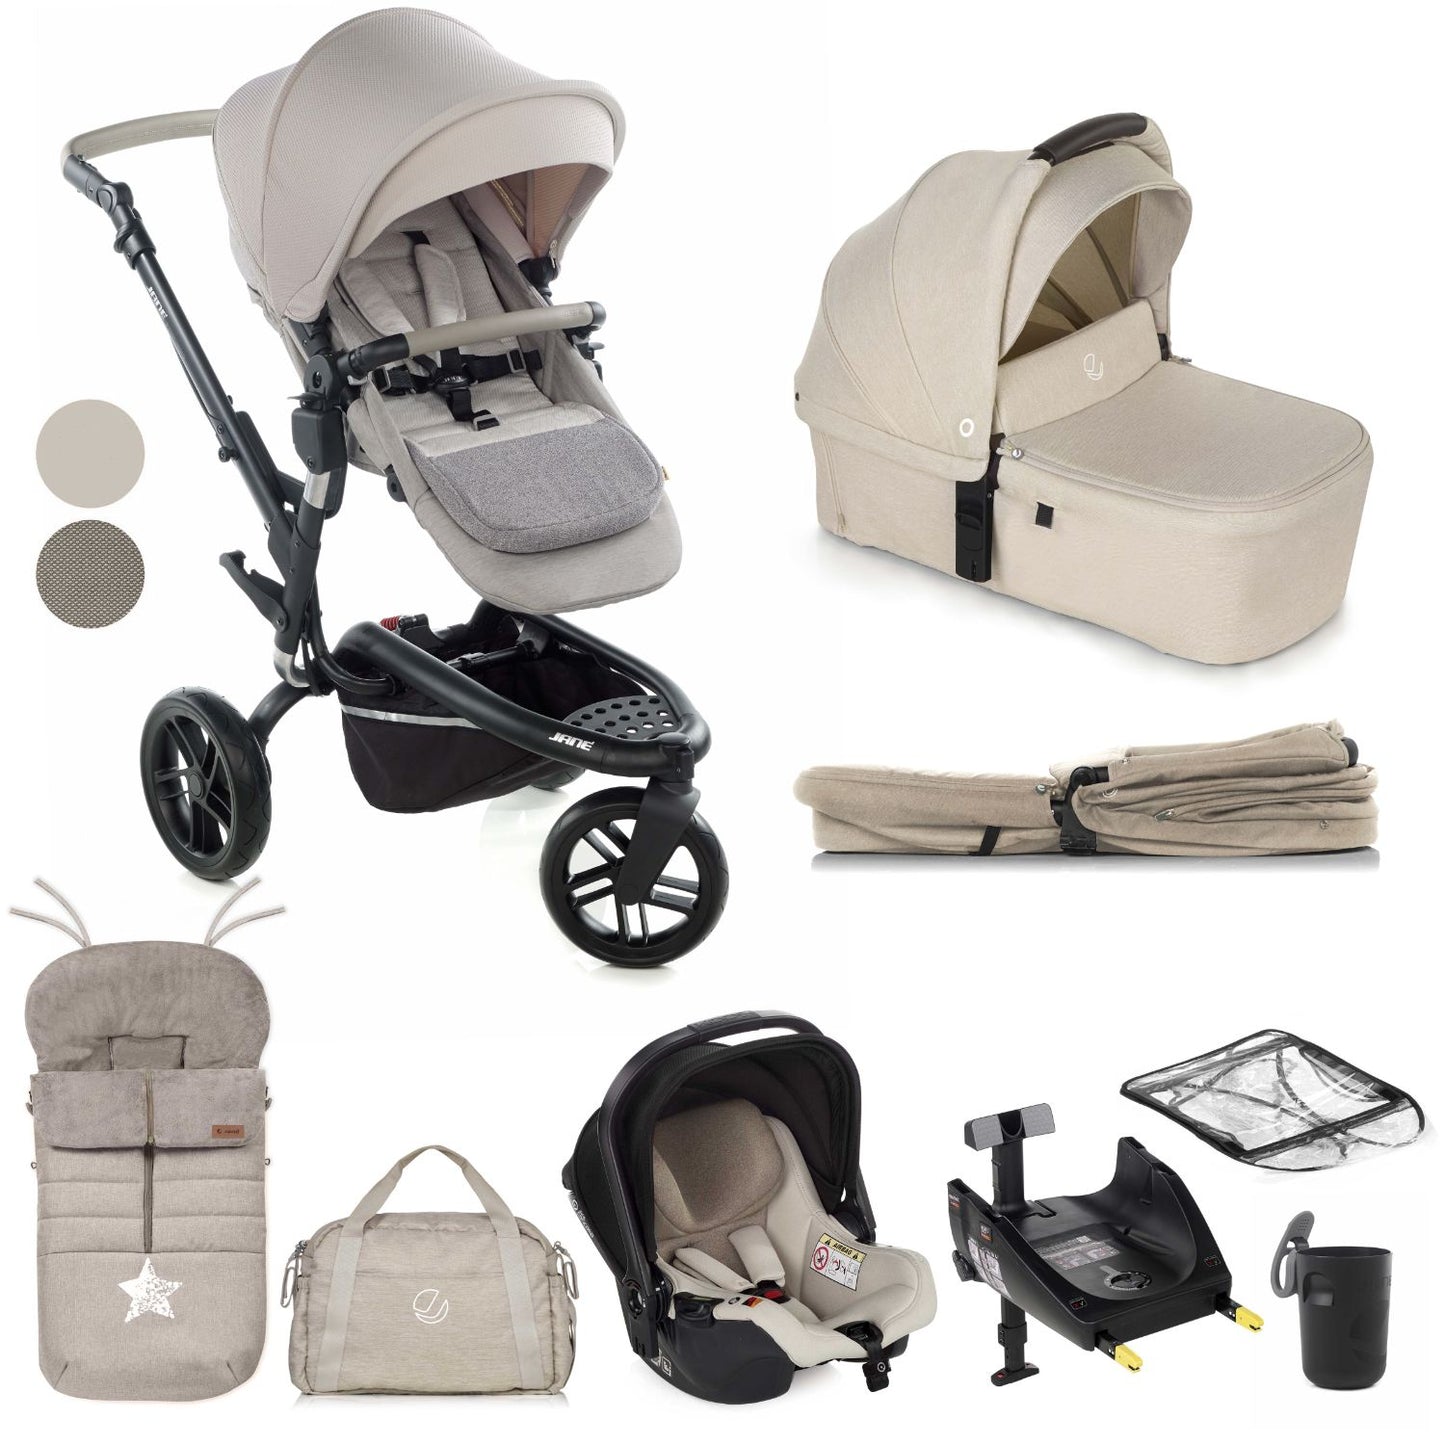 Jané Trider + Sweet Carrycot + Koos iSize 3-in-1 Travel System (10 piece bundle)